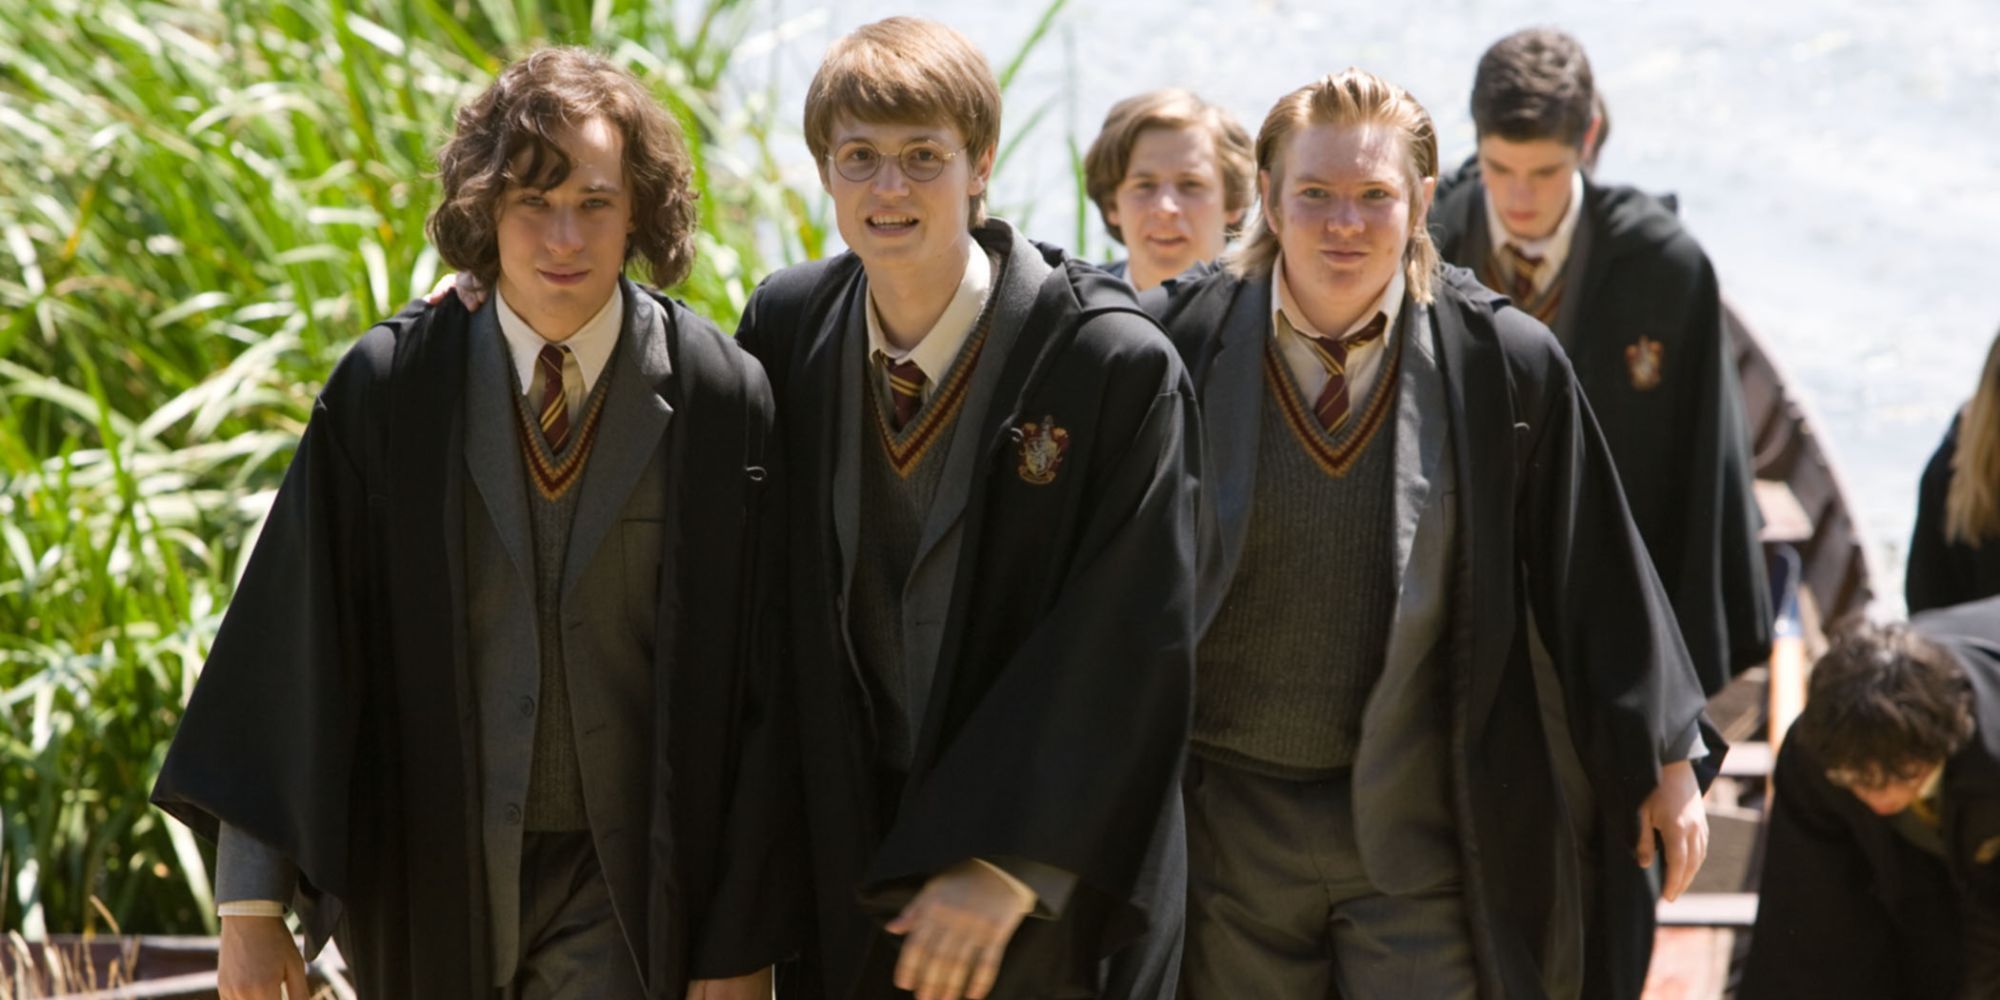 Marauders featuring young James, Sirius, Remus, and Peter